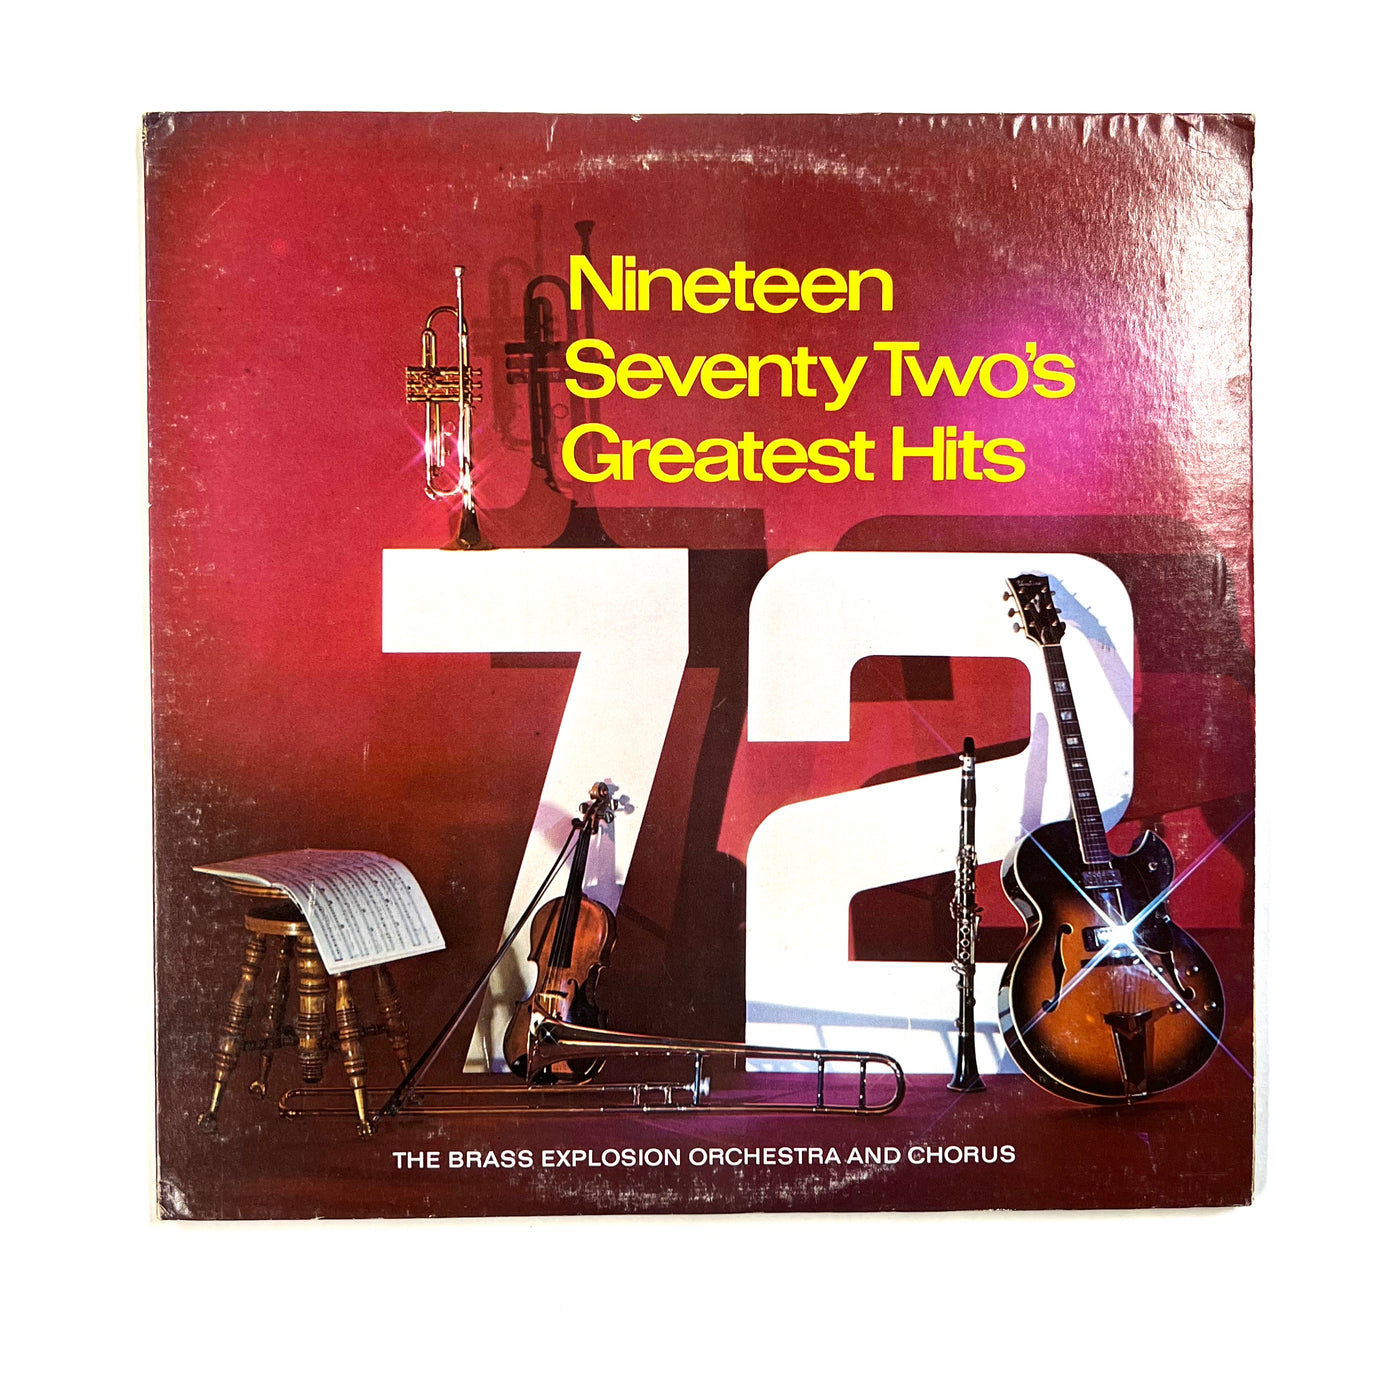 The Brass Explosion Orchestra And Chorus - Nineteen Seventy Two's Greatests Hits